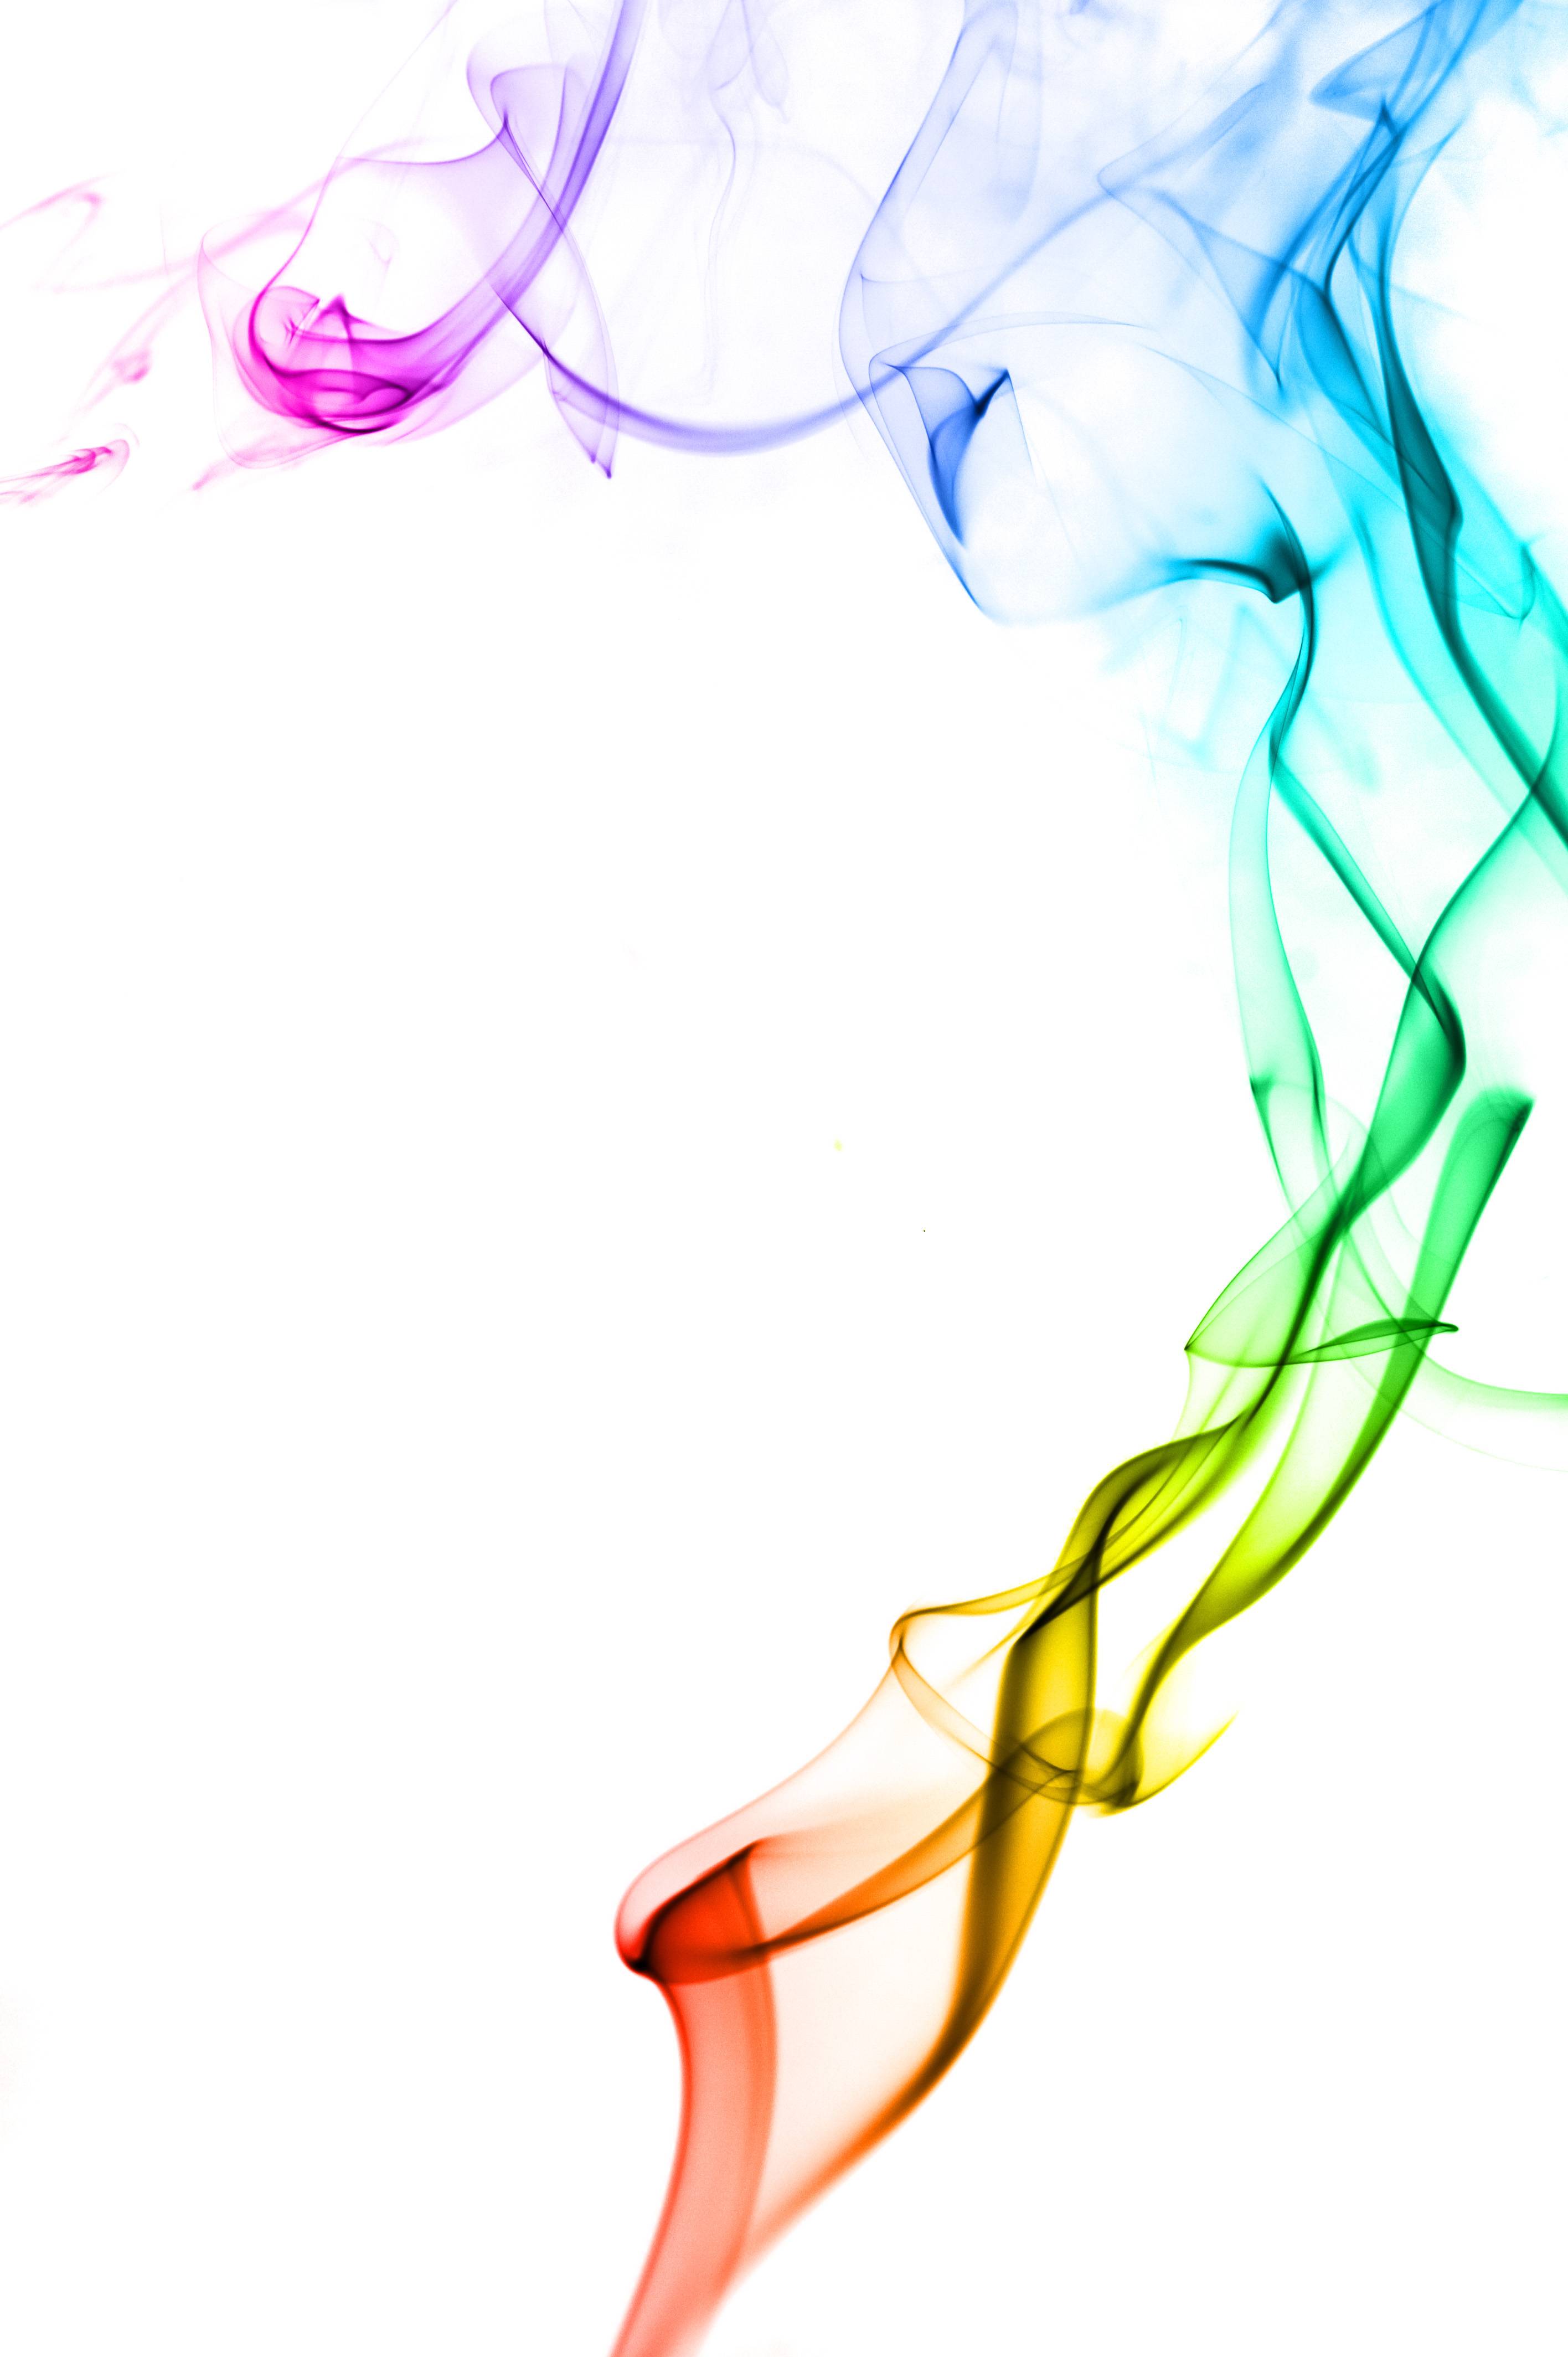 Wallpaper For > Colorful Smoke White Background